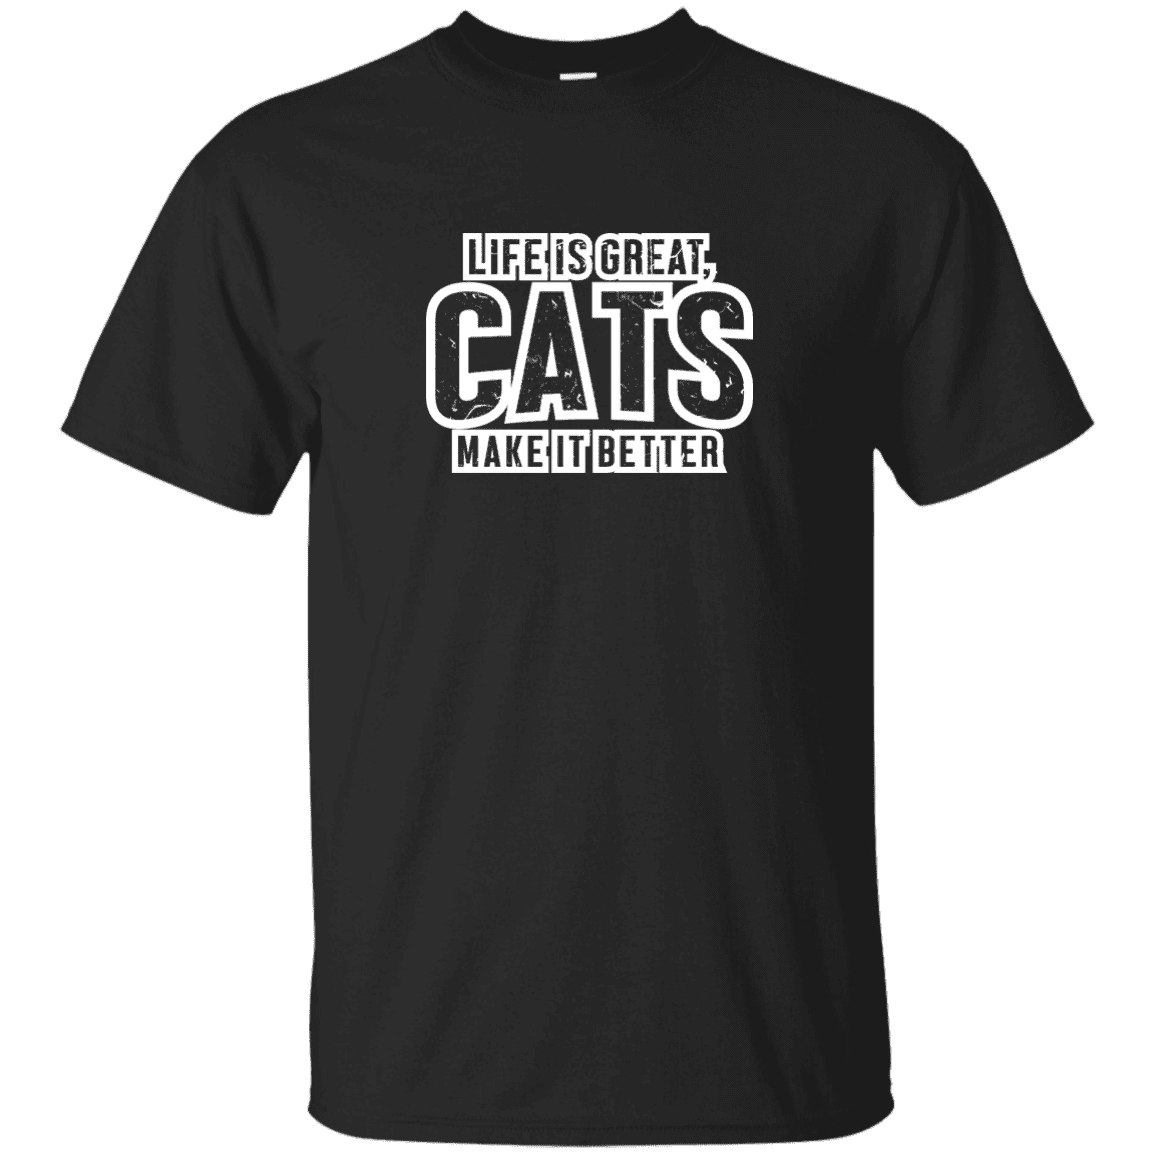 Life Is Great Cats - T Shirt.